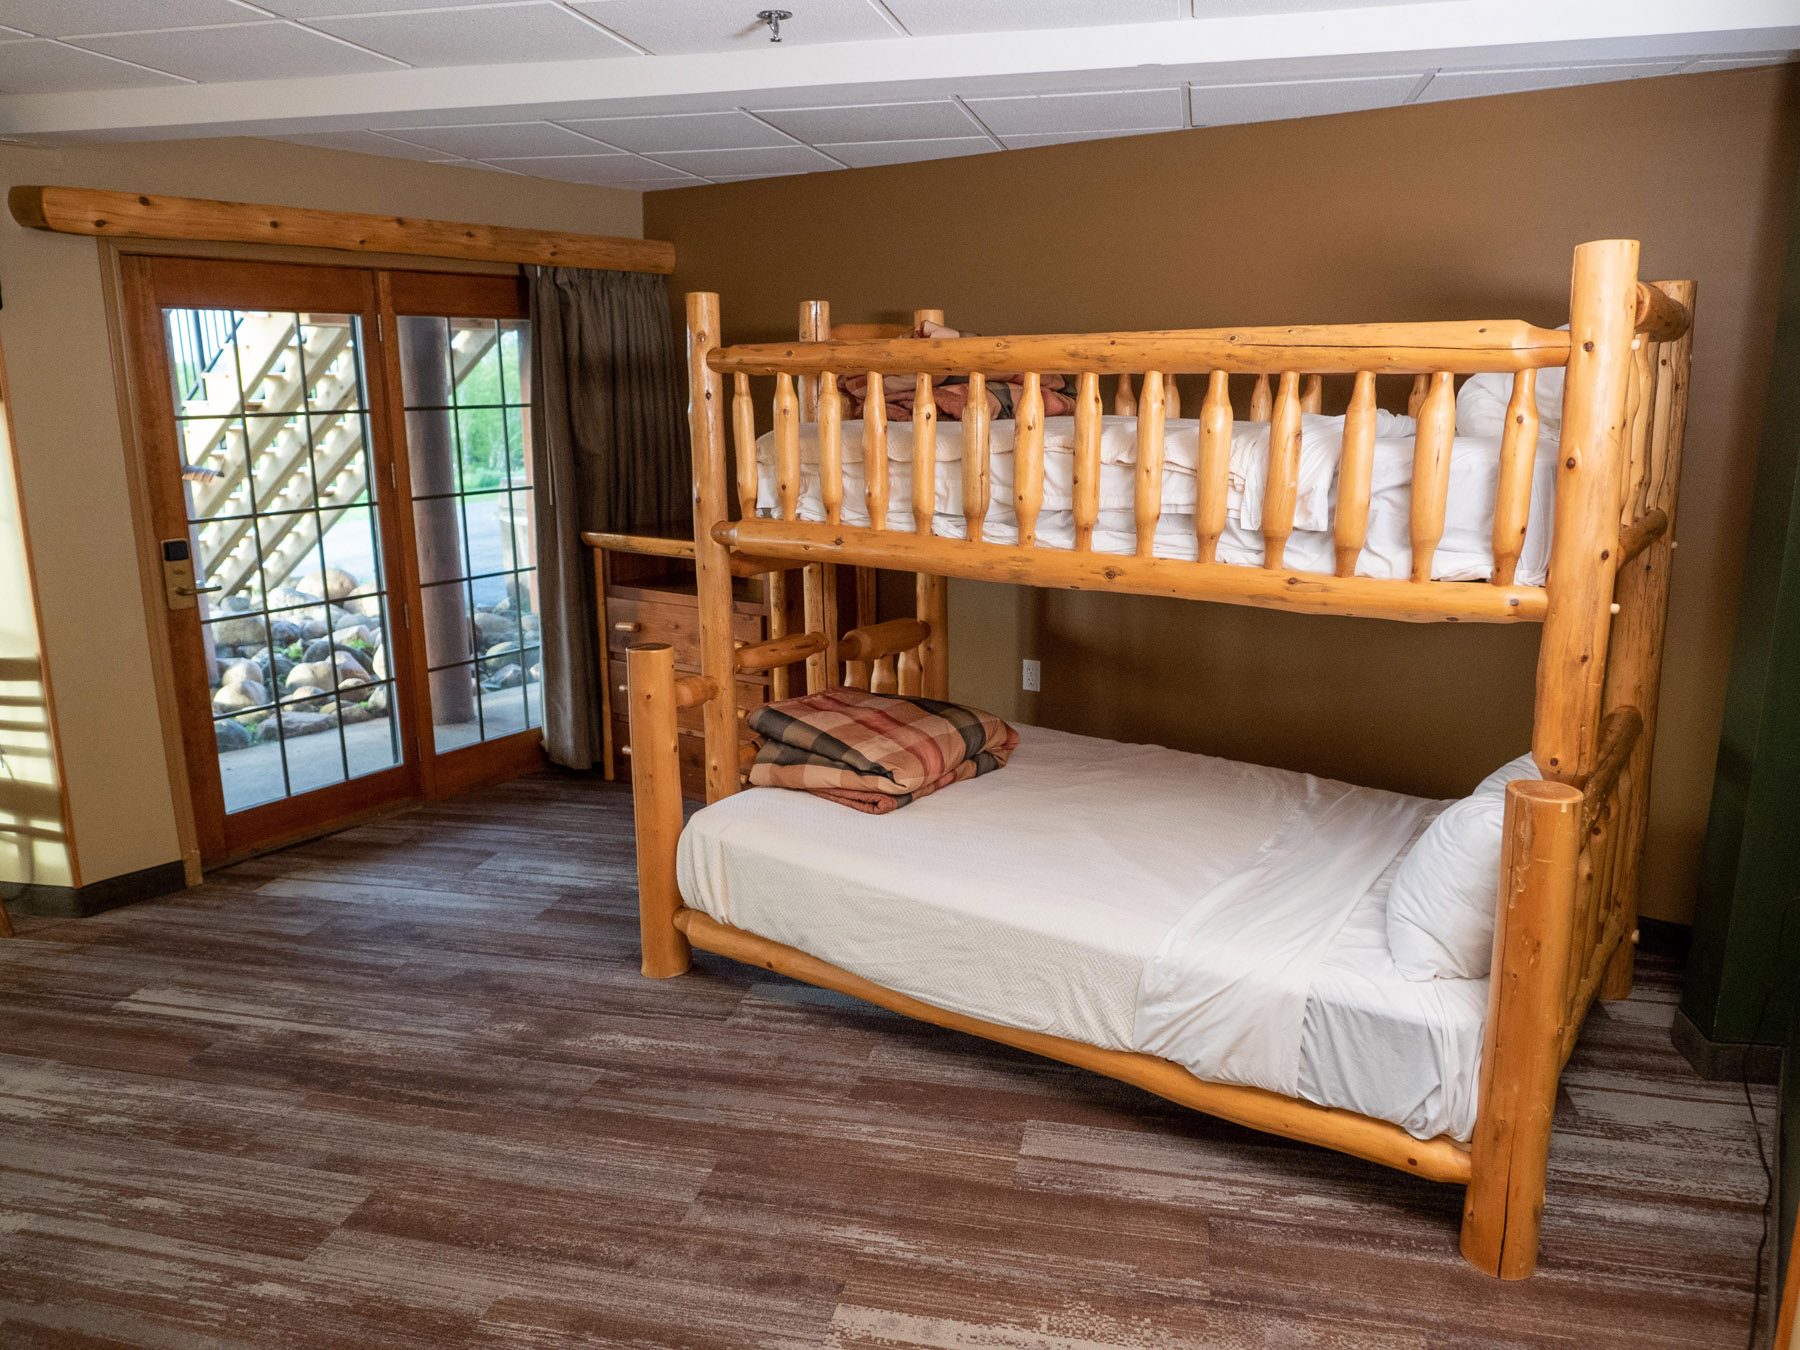 Kids' one-room suite with wooden bunk beds and couch